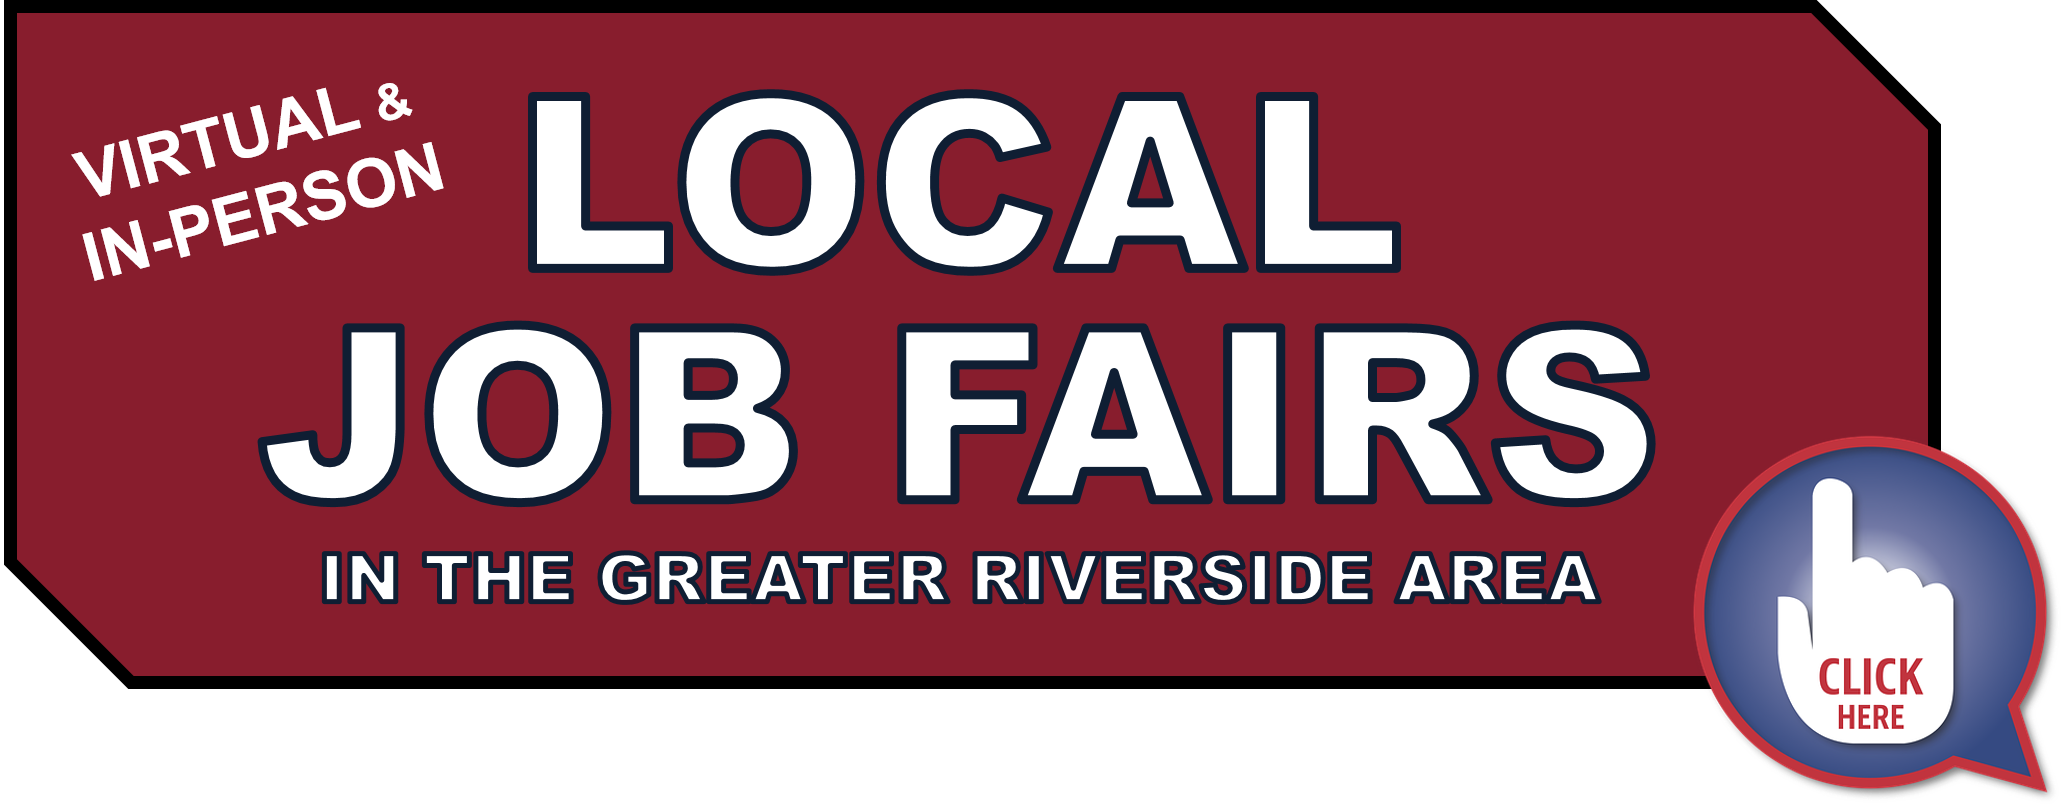 Local Job Fairs Button.png